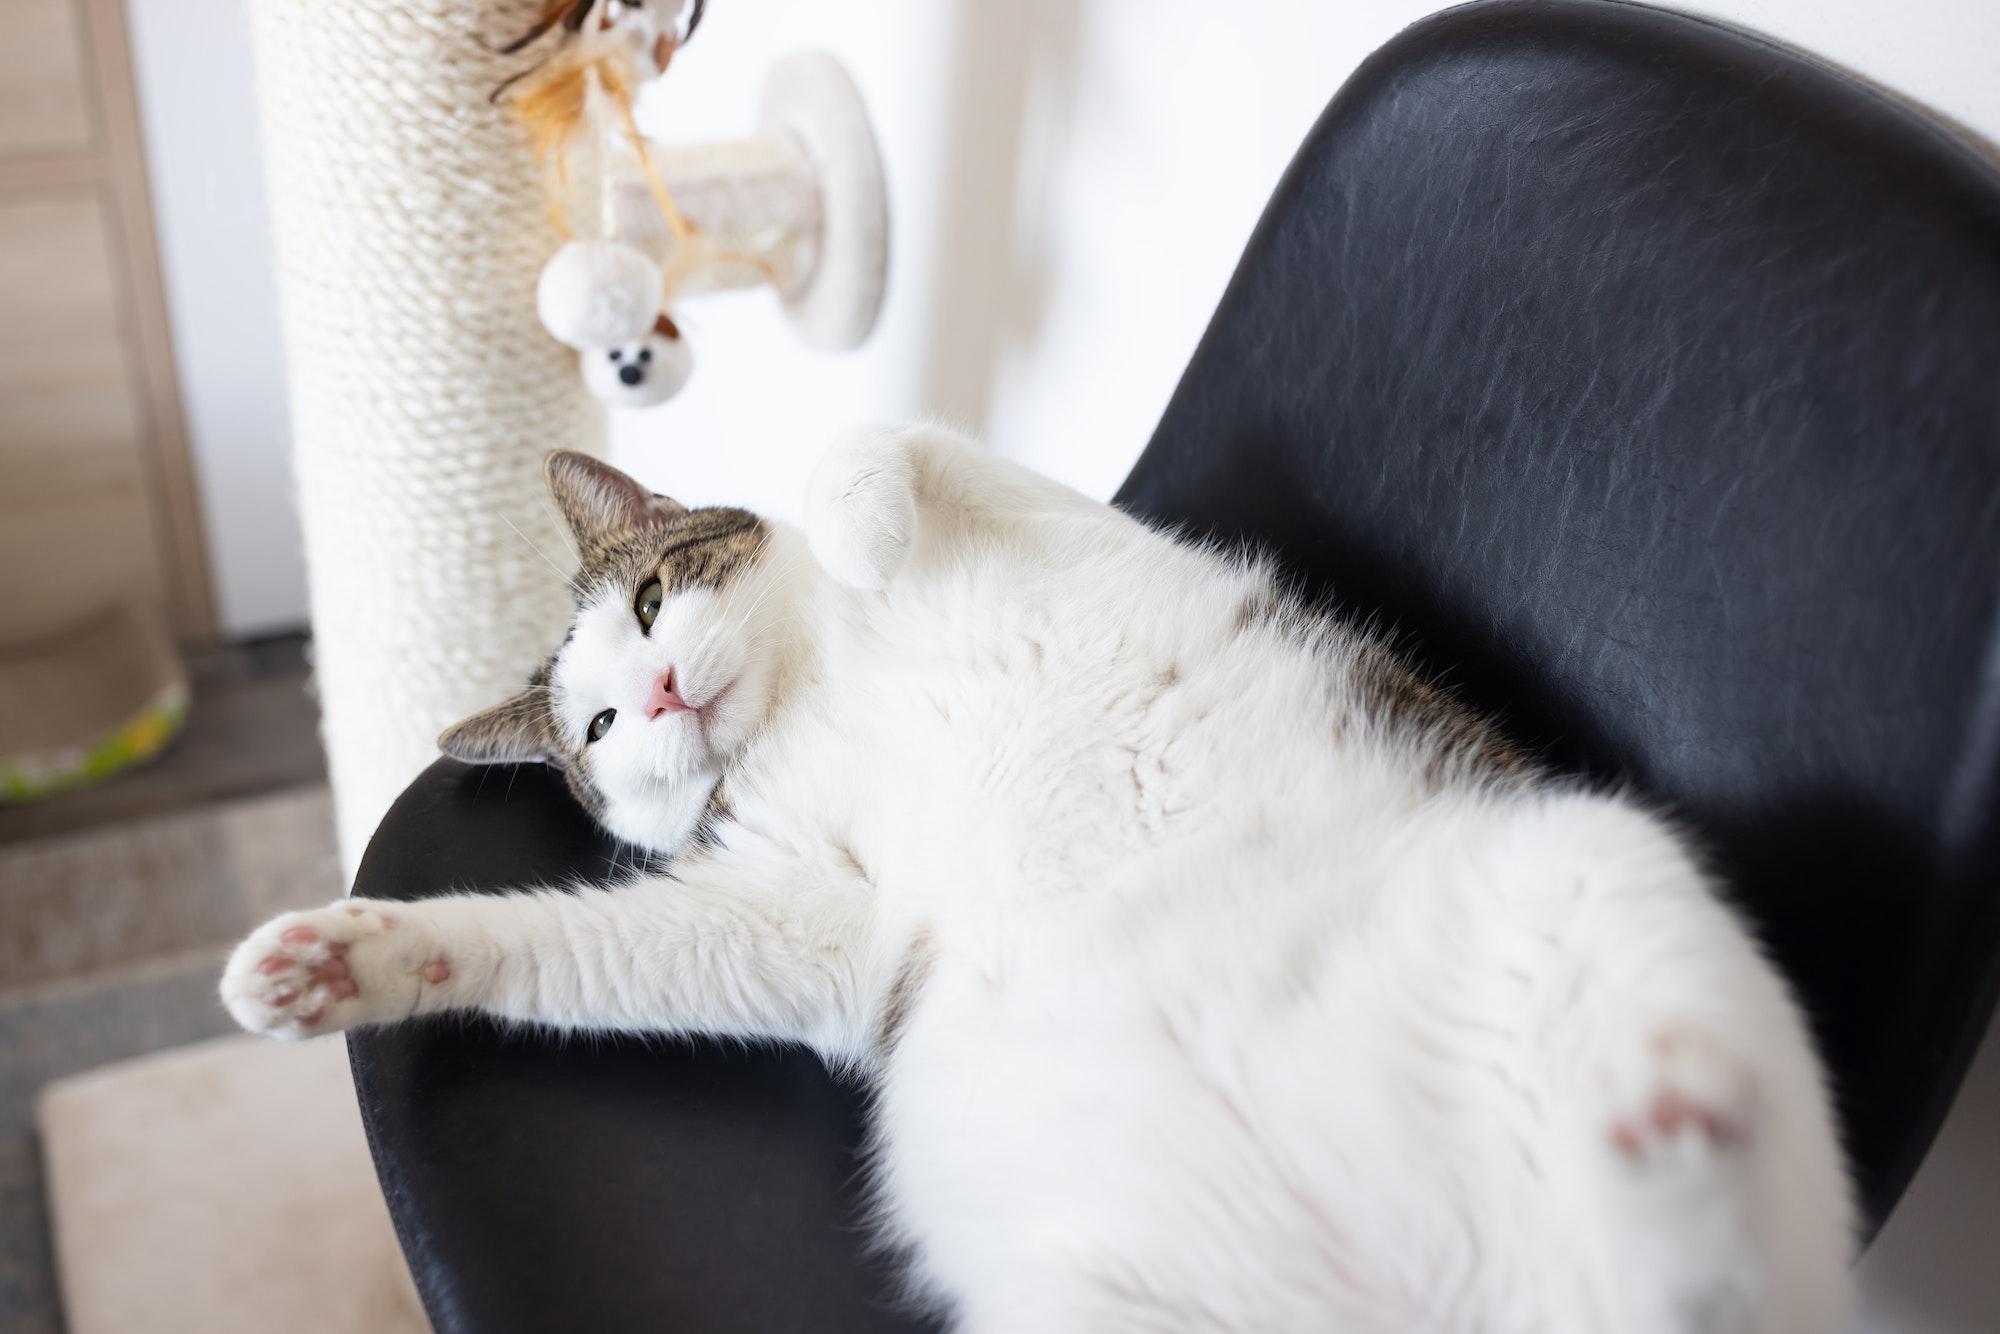 Fat cat laying on leather chair next to scratching post